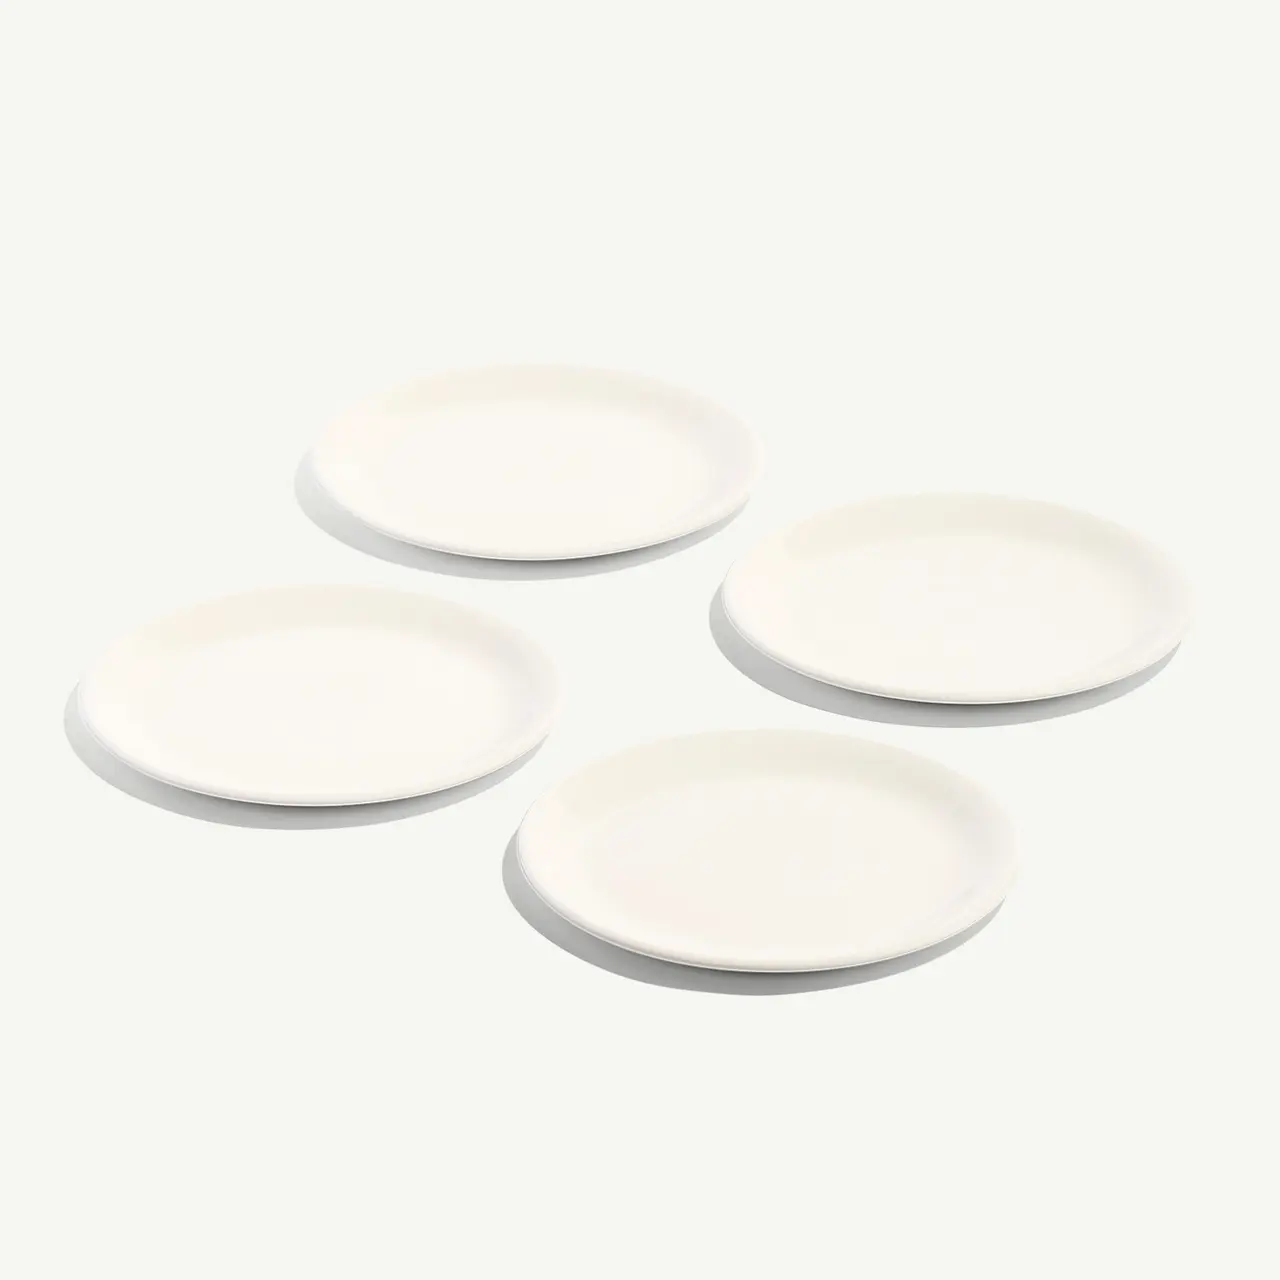 Four white round plates are arranged on a light background.